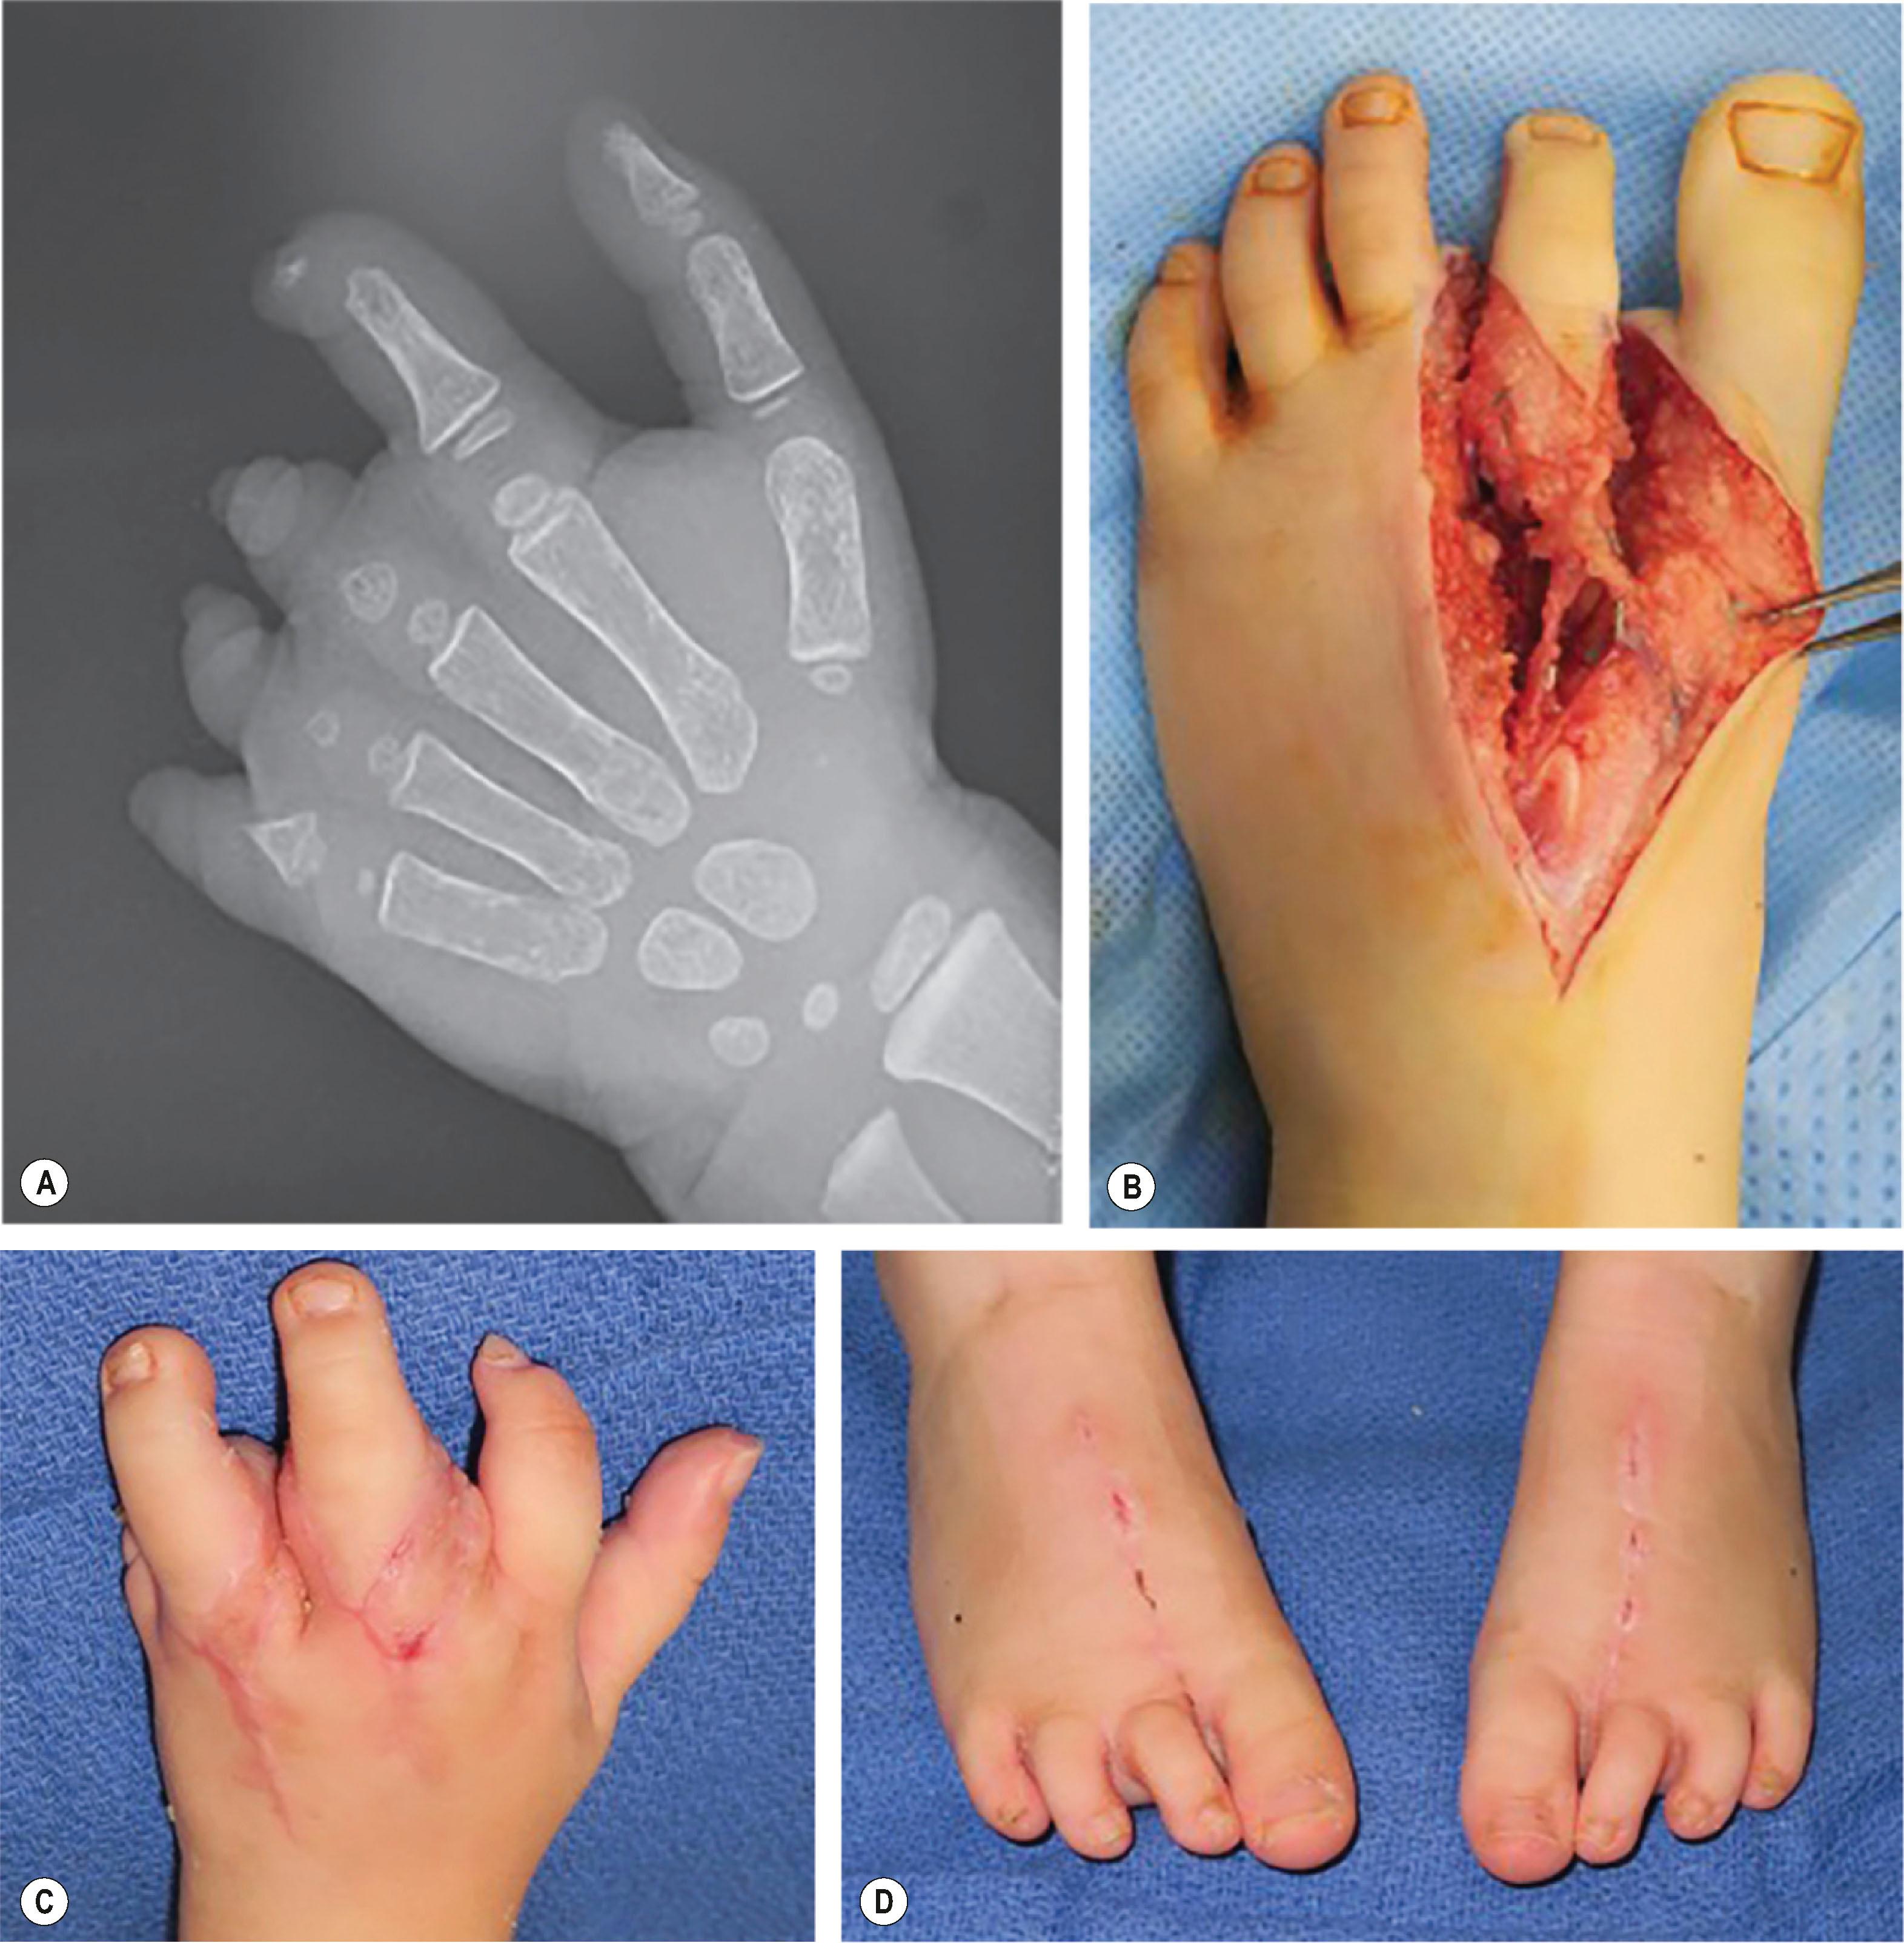 Figure 34.6, Patient with oligodactylic symbrachydactyly who underwent double free second toe-to-hand transfers for reconstruction of the middle and ring fingers. (A) Preoperative radiograph. (B) Intraoperative dissection of toe. (C) Postoperative photo of hand. (D) Postoperative photo of feet donor sites.